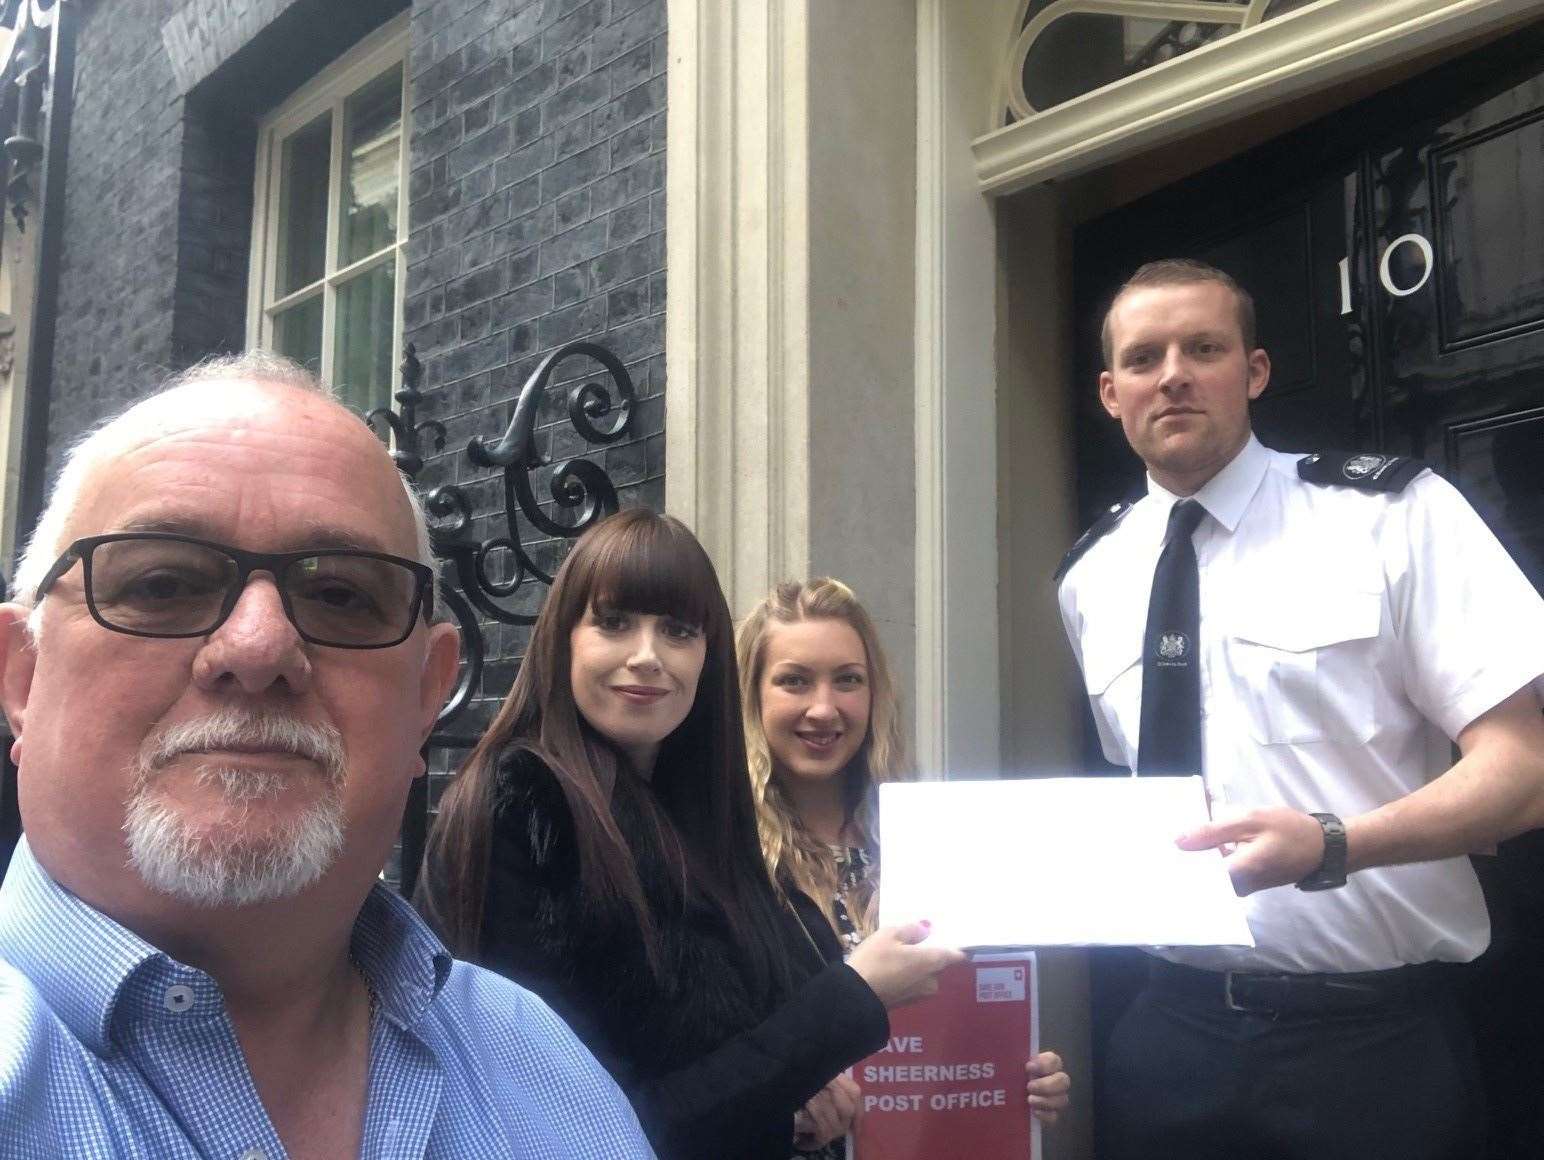 Mole Meade, of the Communications Workers Union, and Laura Steele and Stephanie Nicholls, who work in the Sheerness Post Office, handing over the petition to Number 10